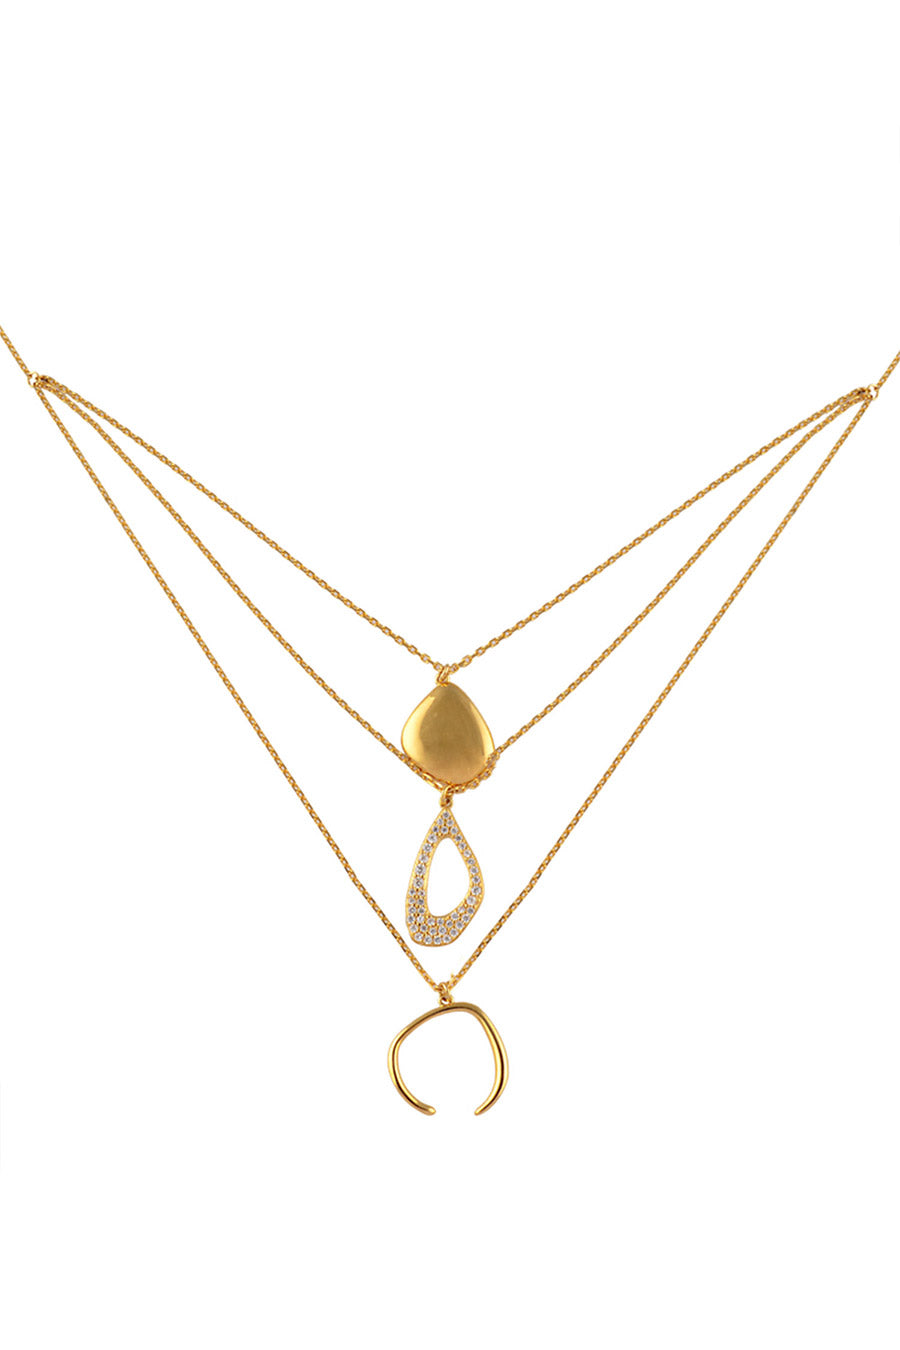 Enchanted Multi Layered Golden Necklace